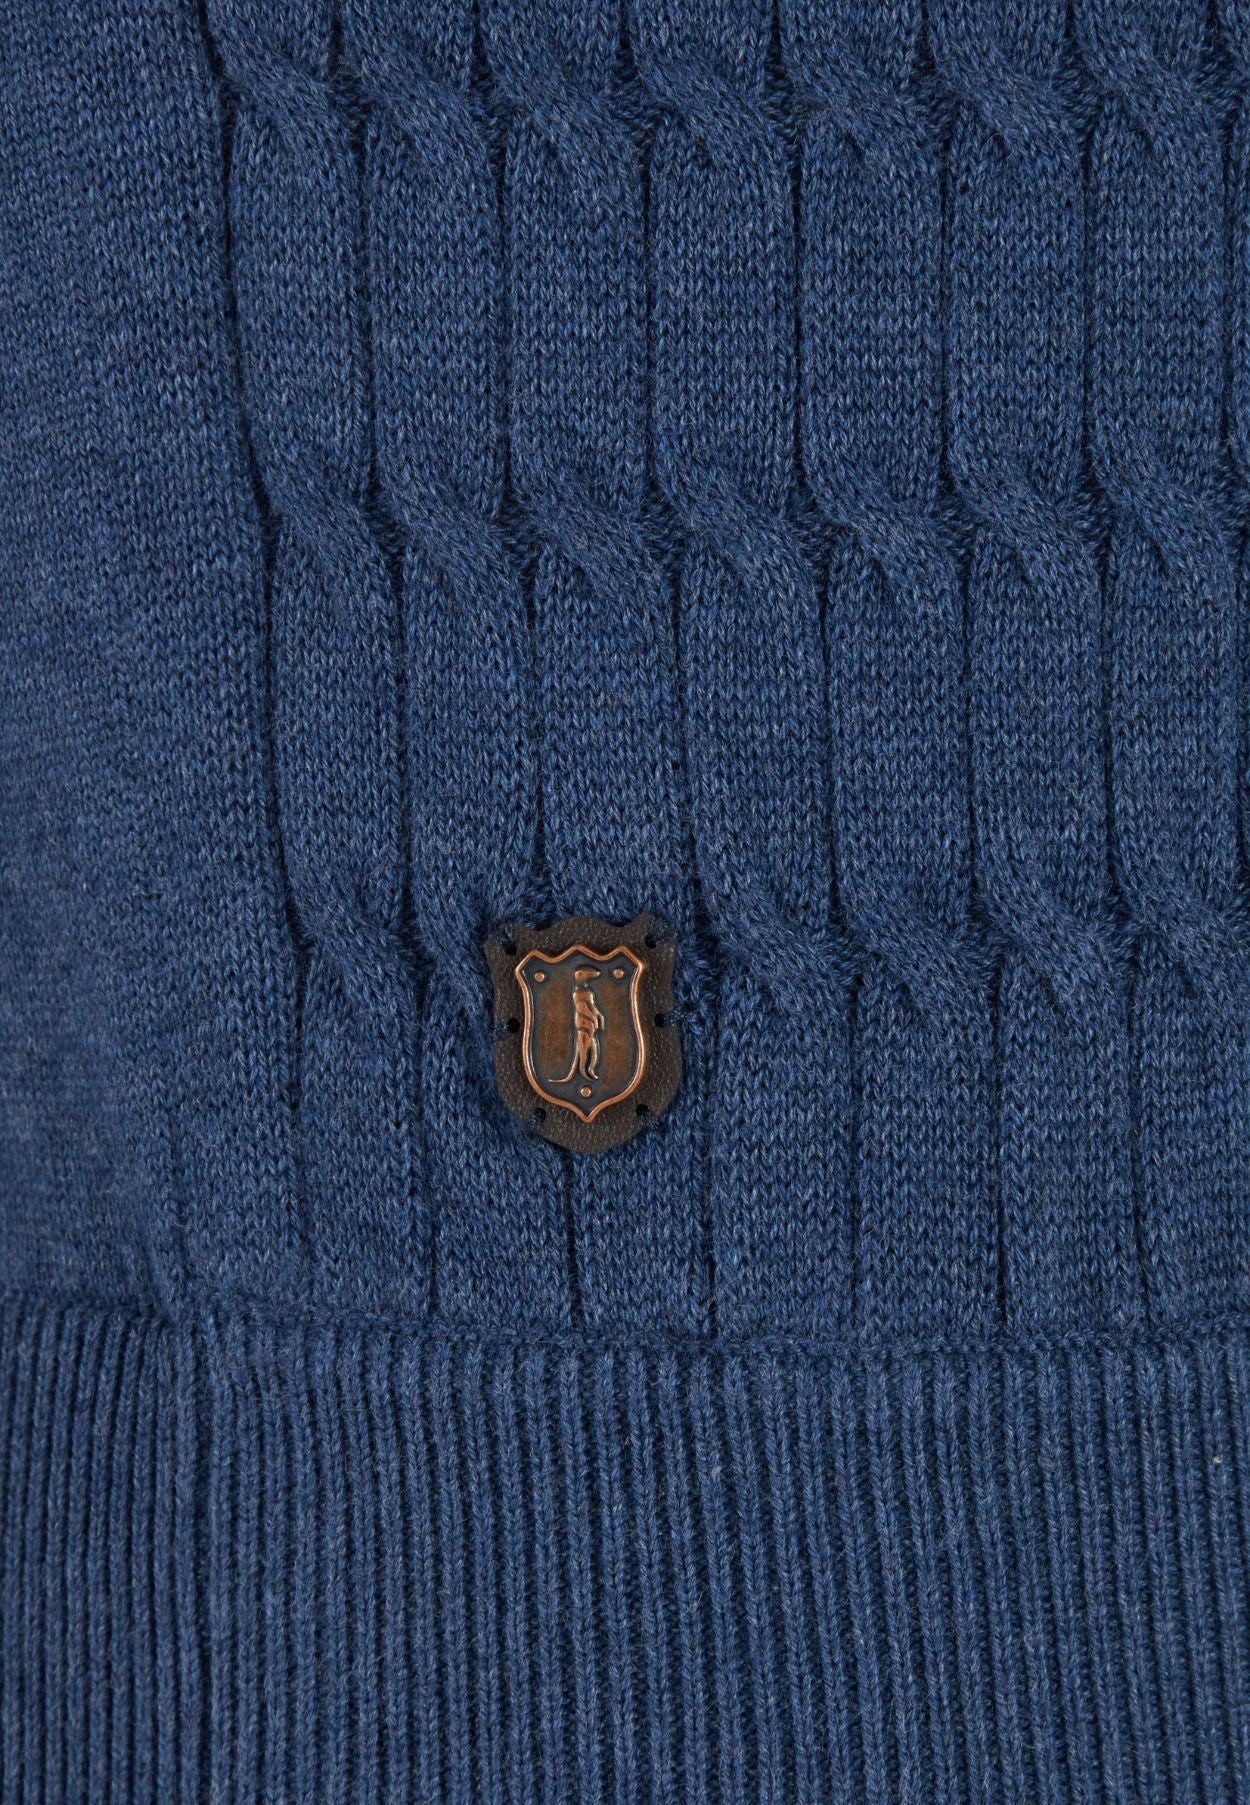 Men's Queen Crew Neck Knitwear - Blue Chine-Close Up View